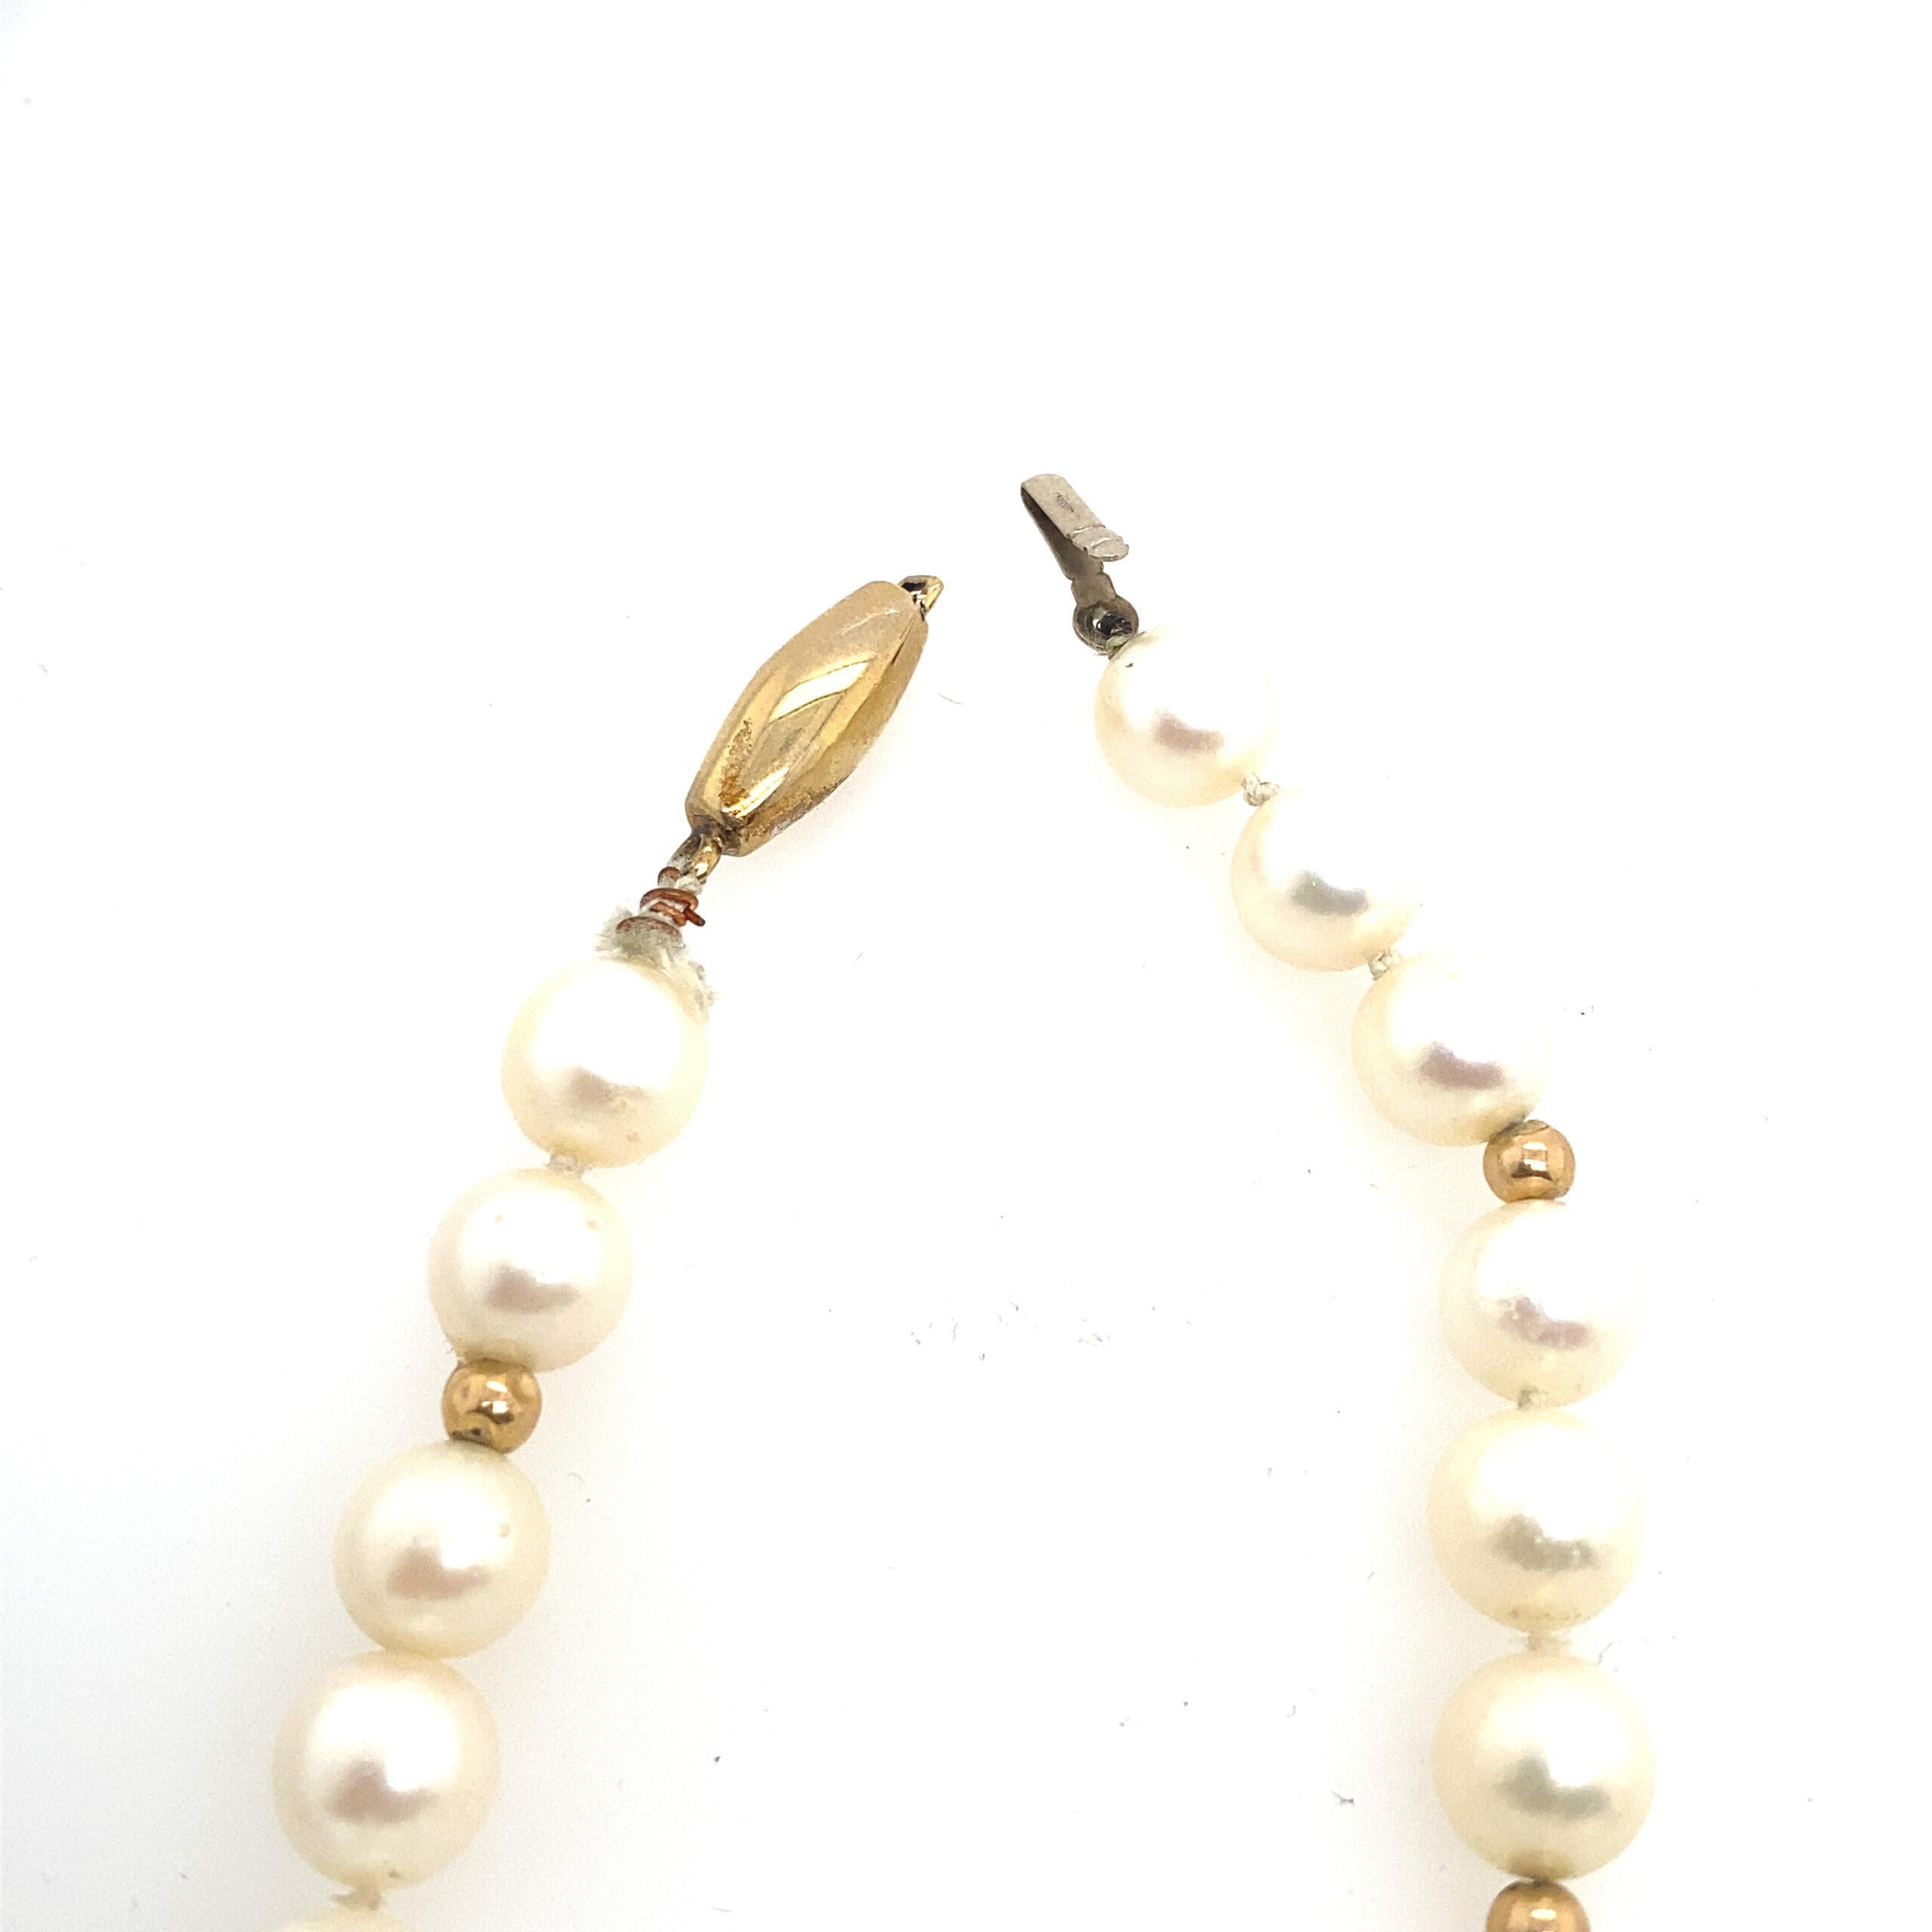 Magnificent Cultured Pearl & 9ct Gold Bead Necklace with a 14ct Gold Large Oval Pendant Set with 1.0ct of Baguette and Round Diamonds.

Additional Information: 
Total Weight: 12g
Necklace Length: 16 inches plus
Oval Pendant: 10g of 14ct Yellow